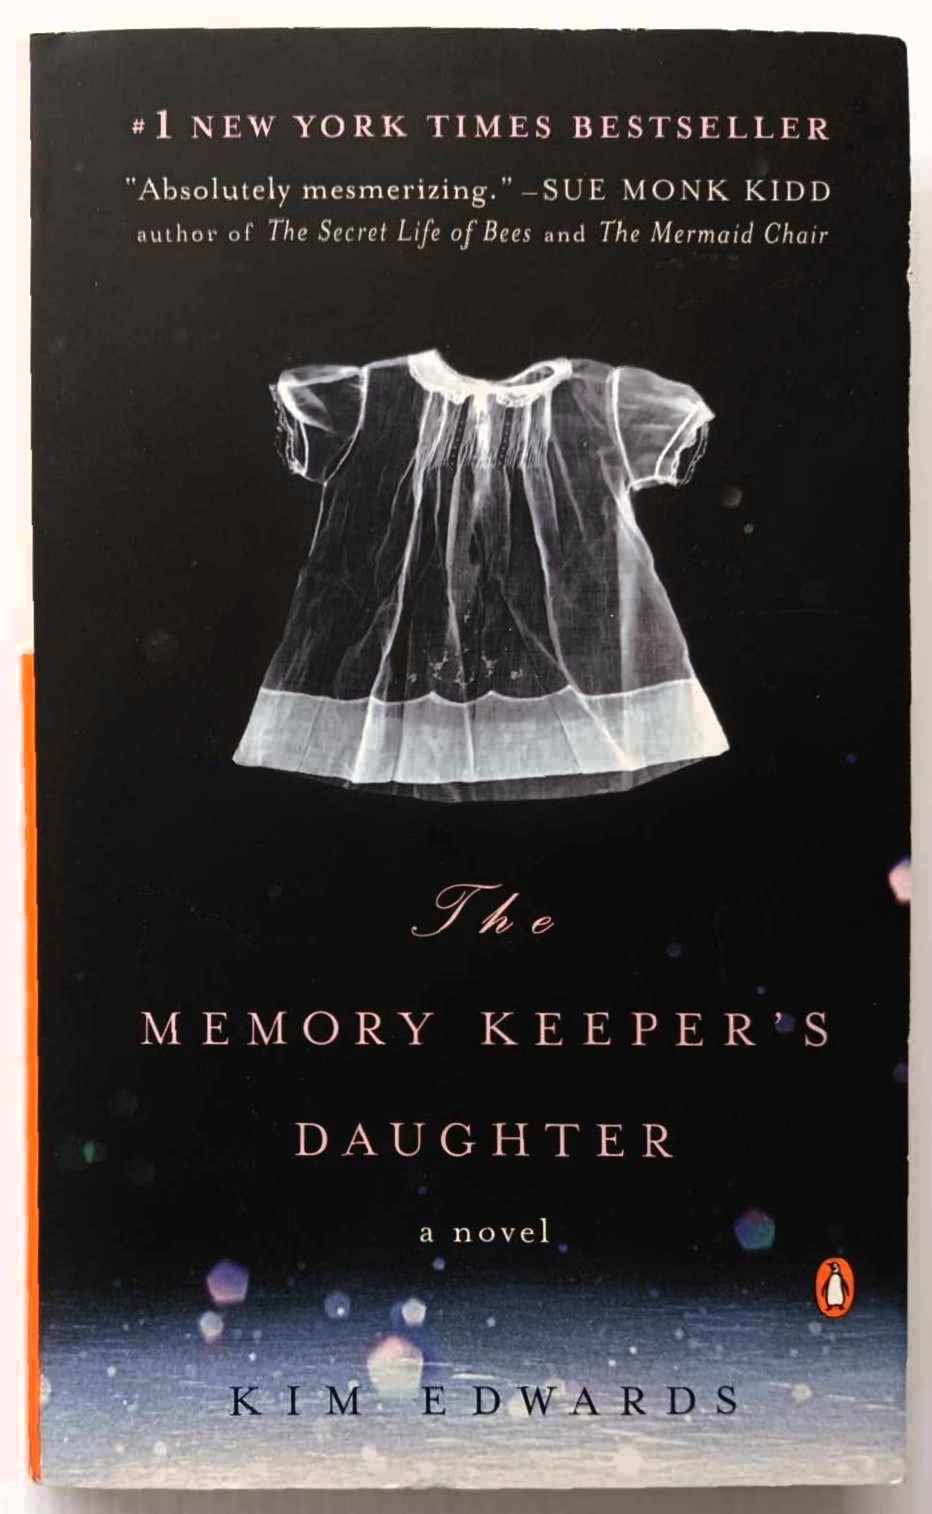 THE MEMORY KEEPER'S DAUGHTER - Kim Edwards